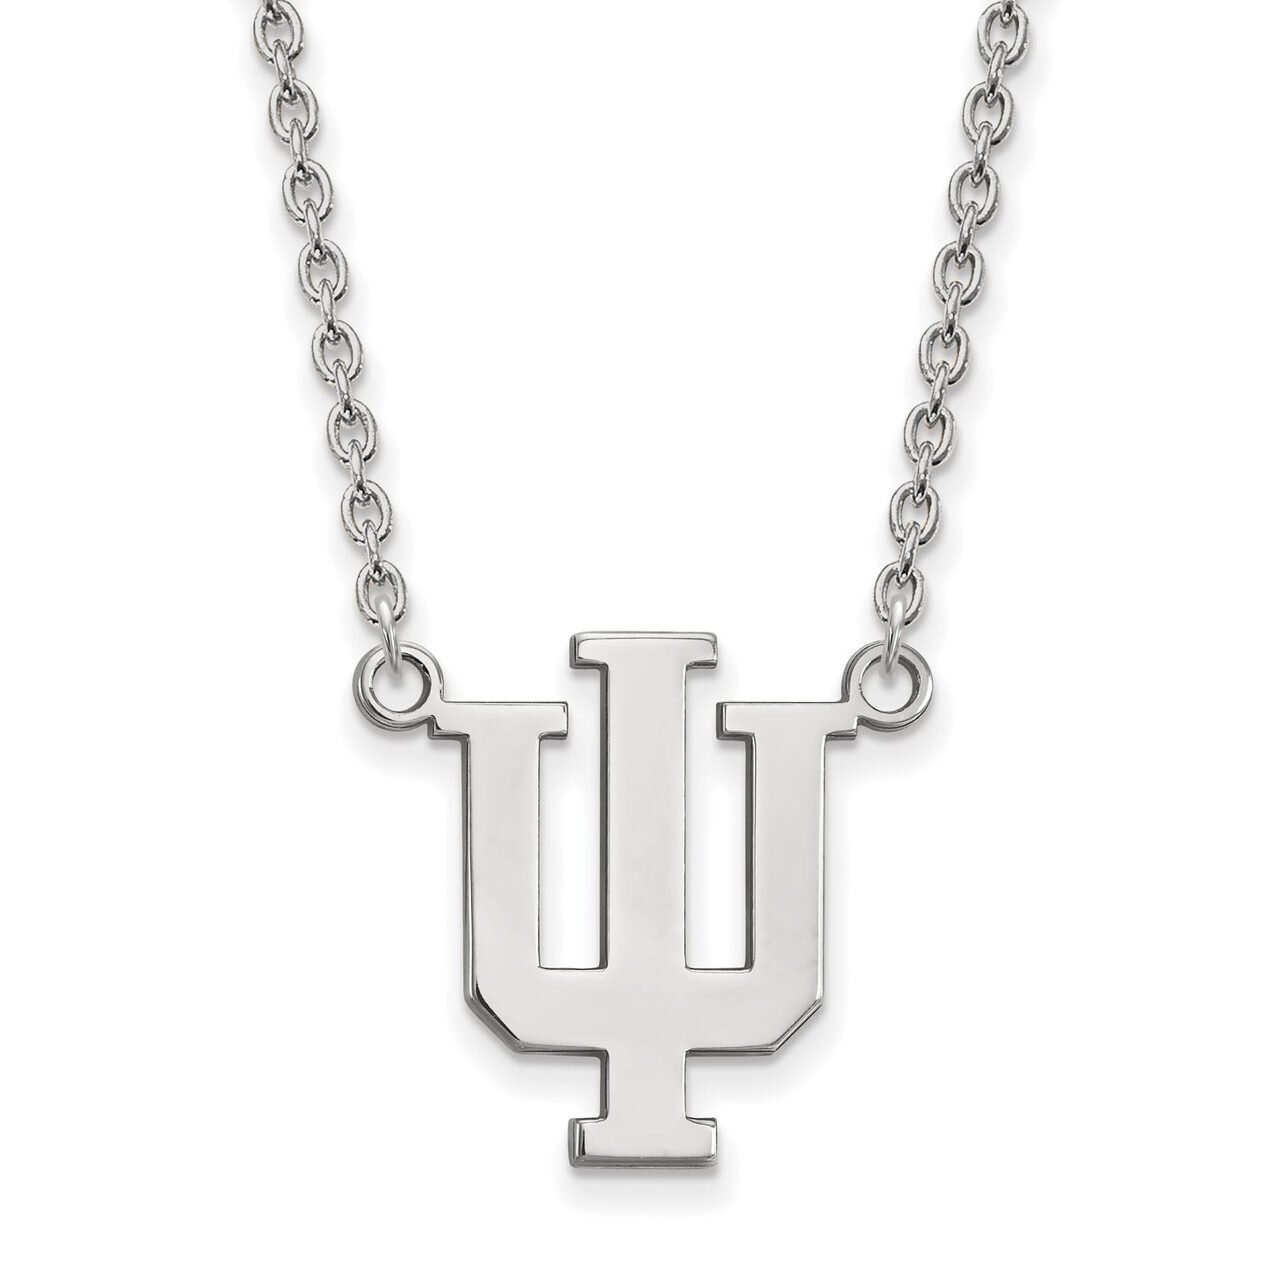 Indiana University Large Pendant with Chain Necklace 14k White Gold 4W016IU-18